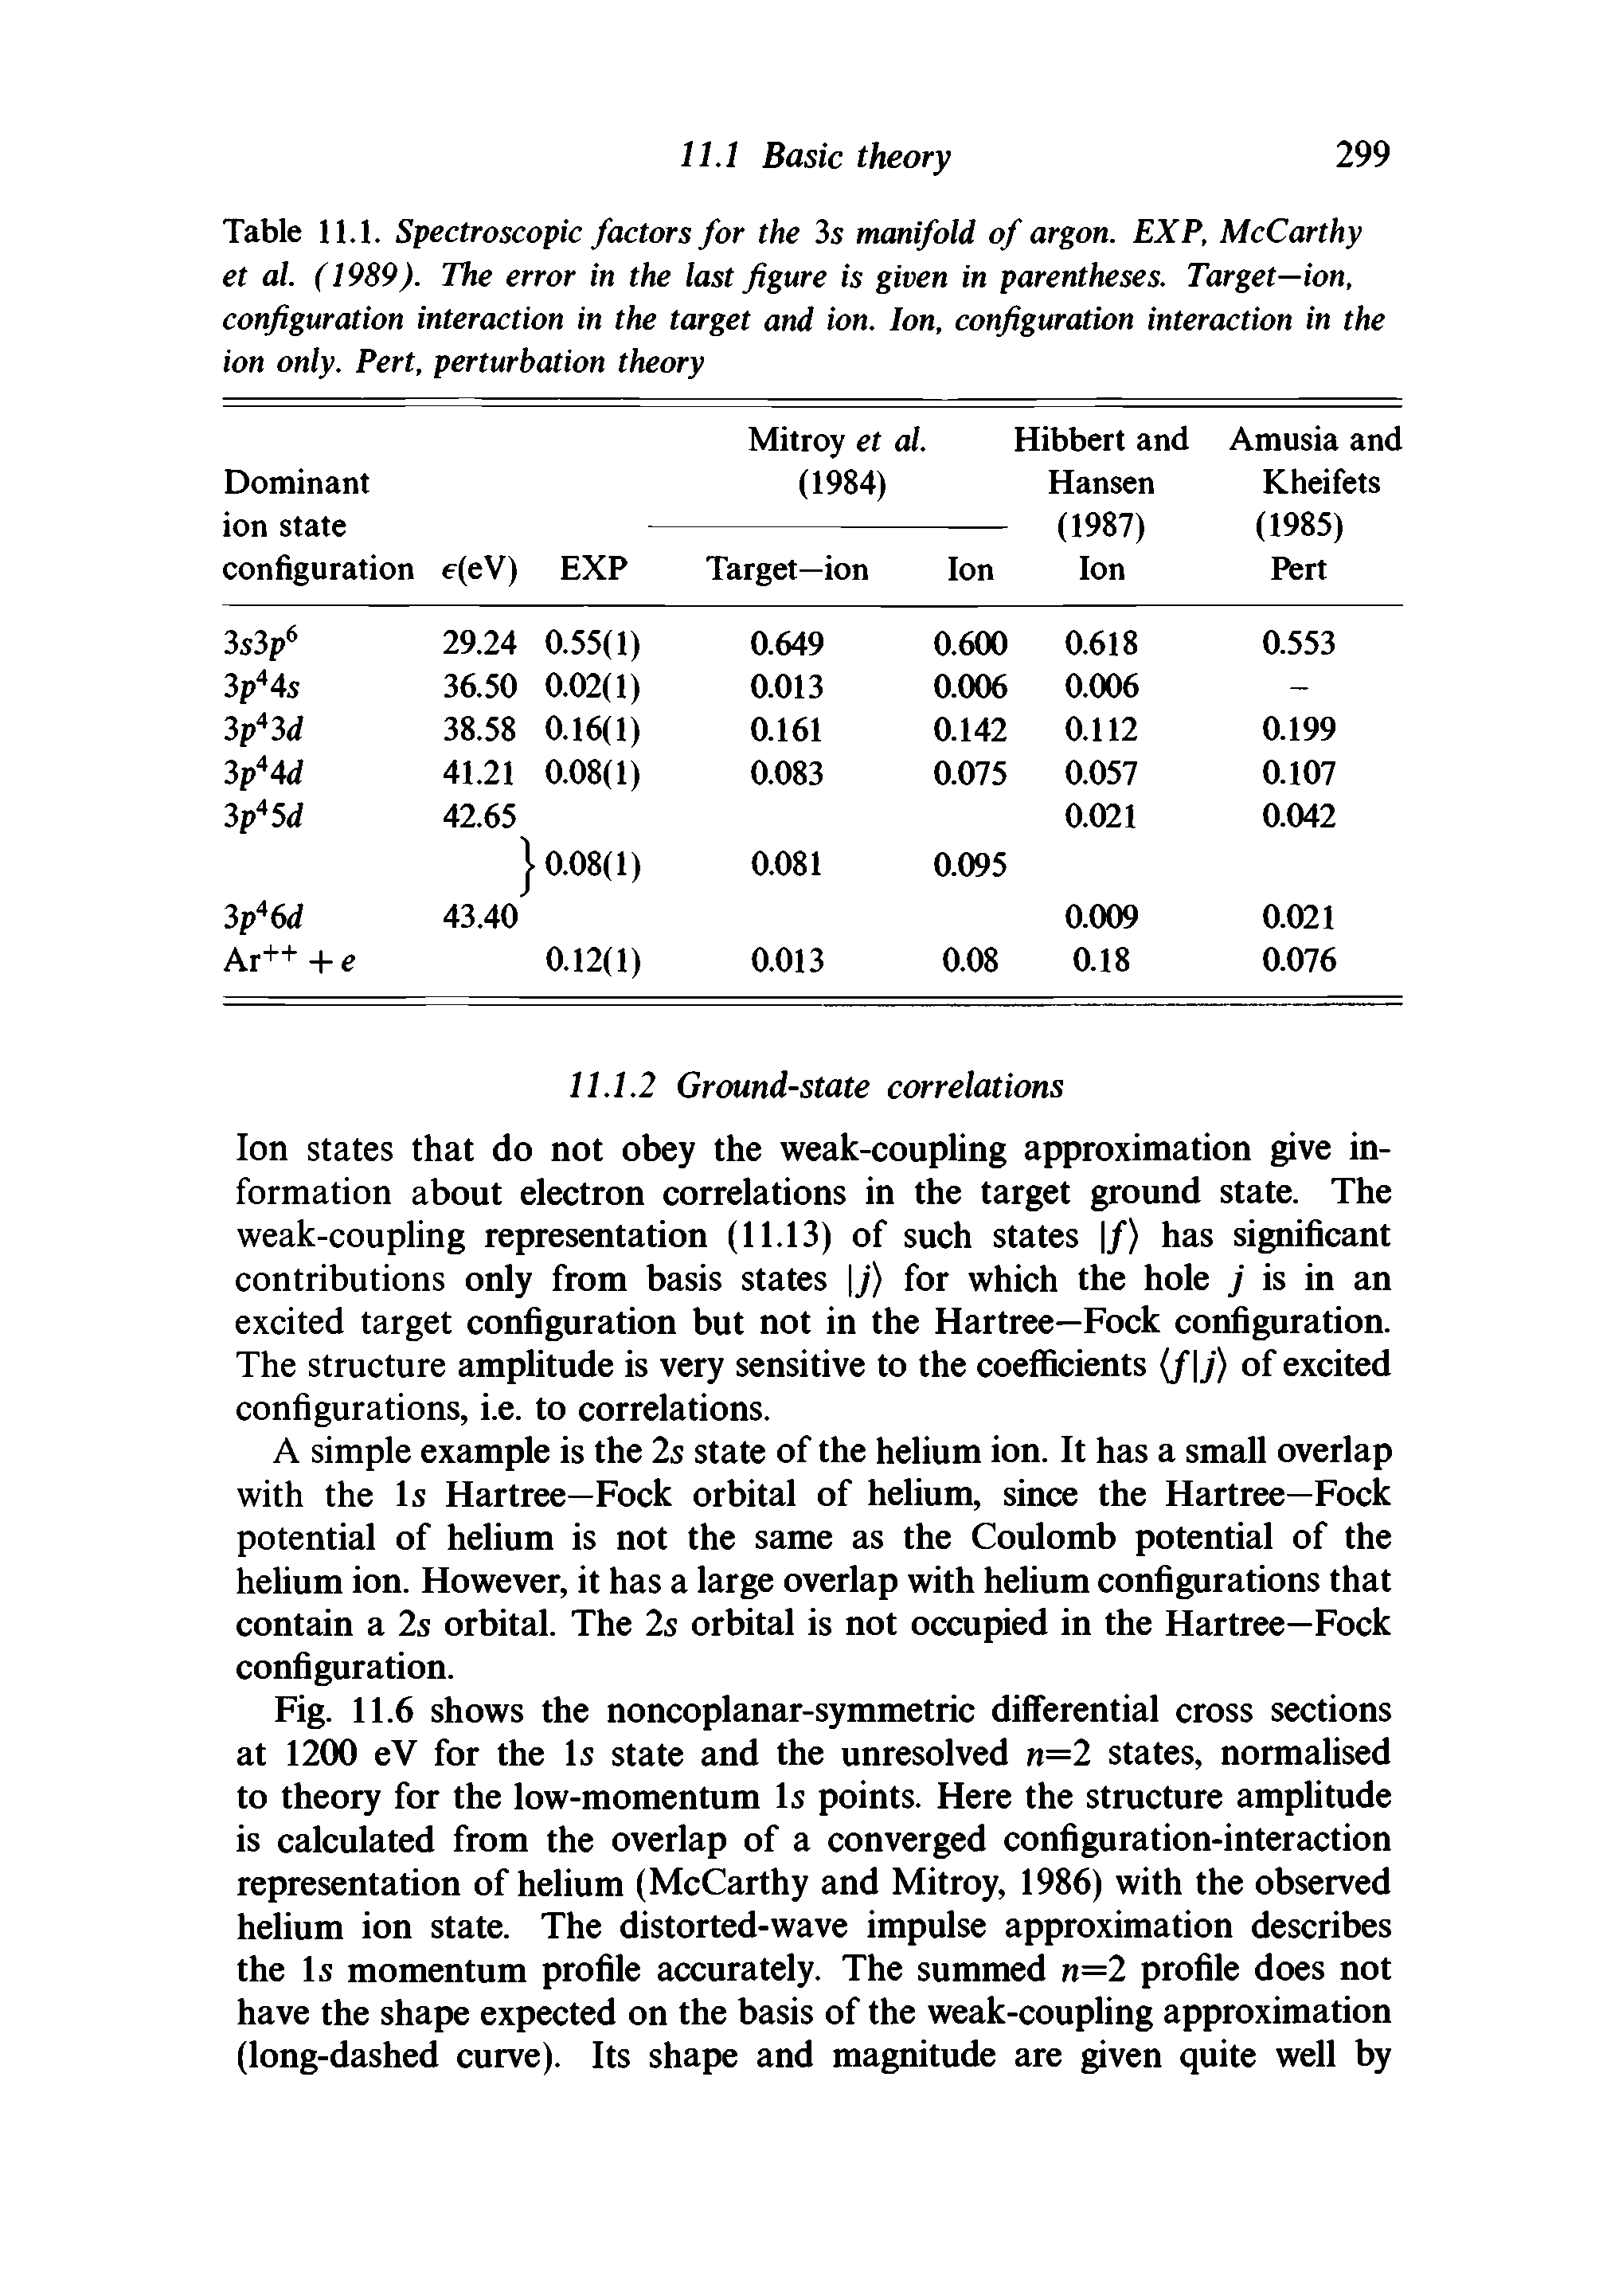 Table 11.1. Spectroscopic factors for the 3s manifold of argon. EXP, McCarthy et al. (1989). The error in the last figure is given in parentheses. Target—ion, configuration interaction in the target and ion. Ion, configuration interaction in the ion only. Pert, perturbation theory...